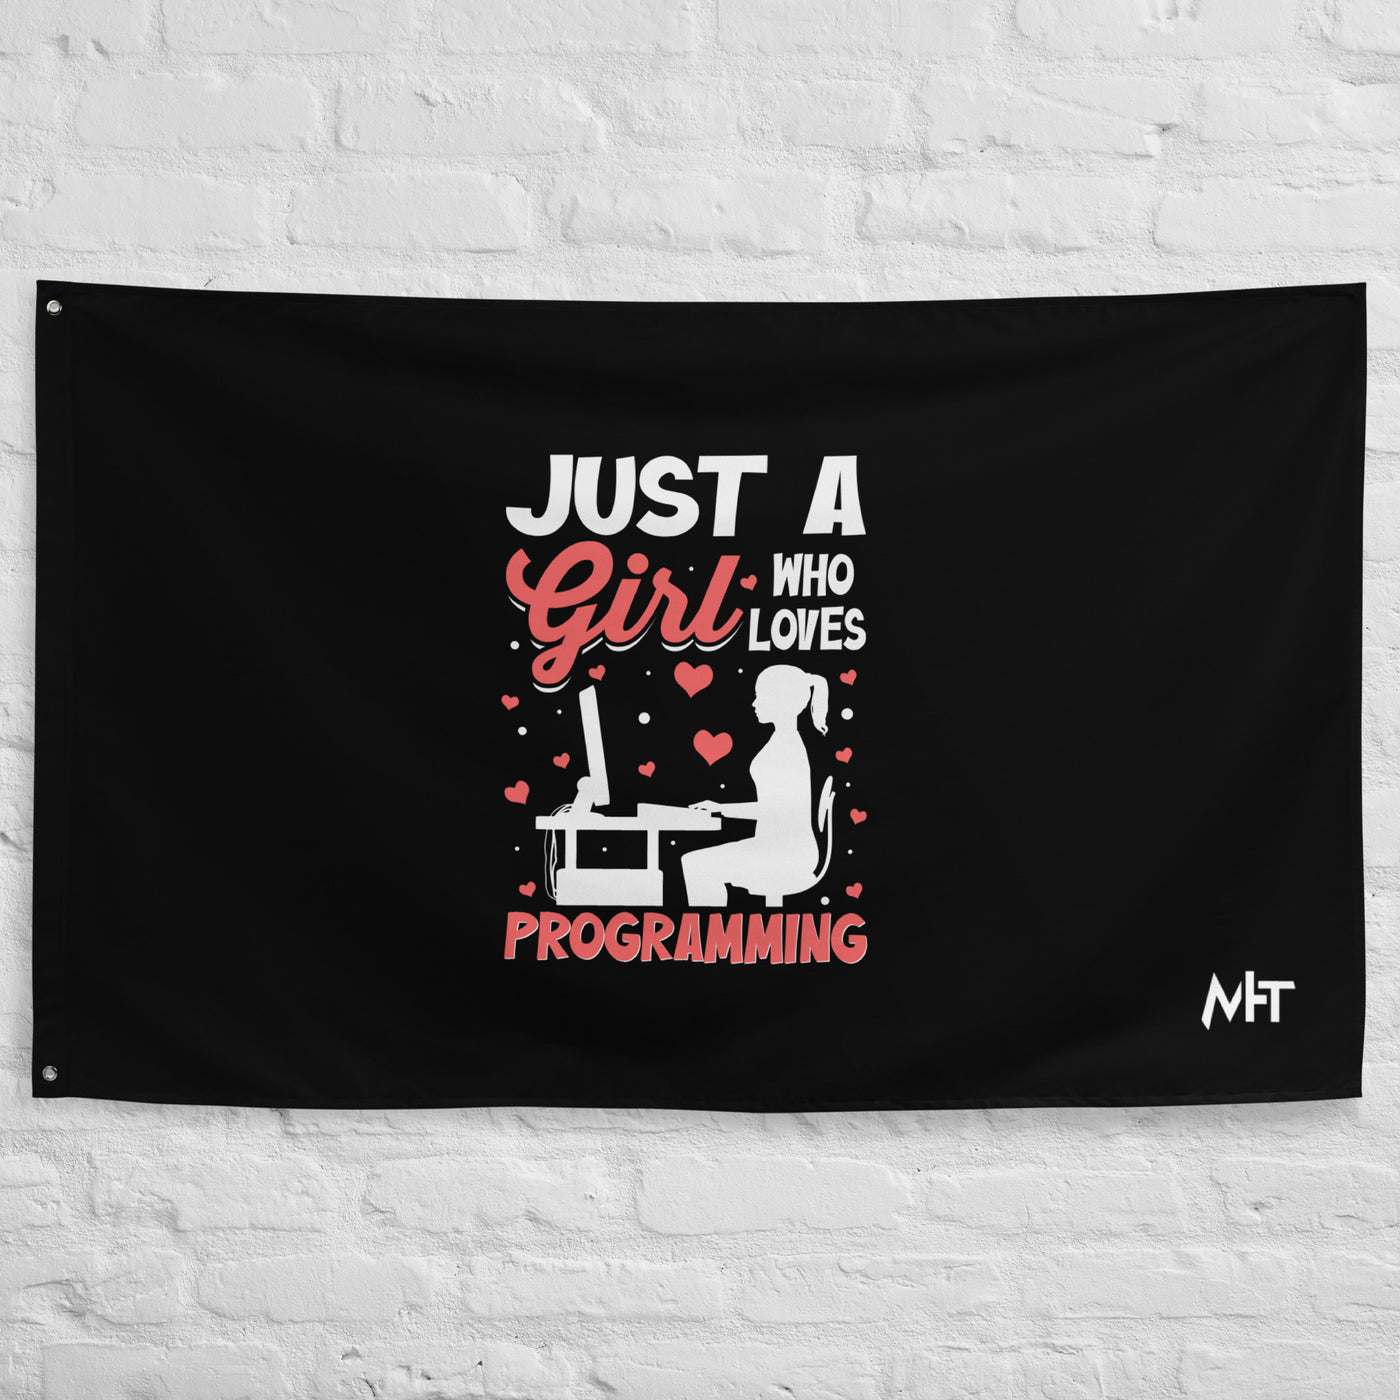 Just a girl who loves programming - Flag